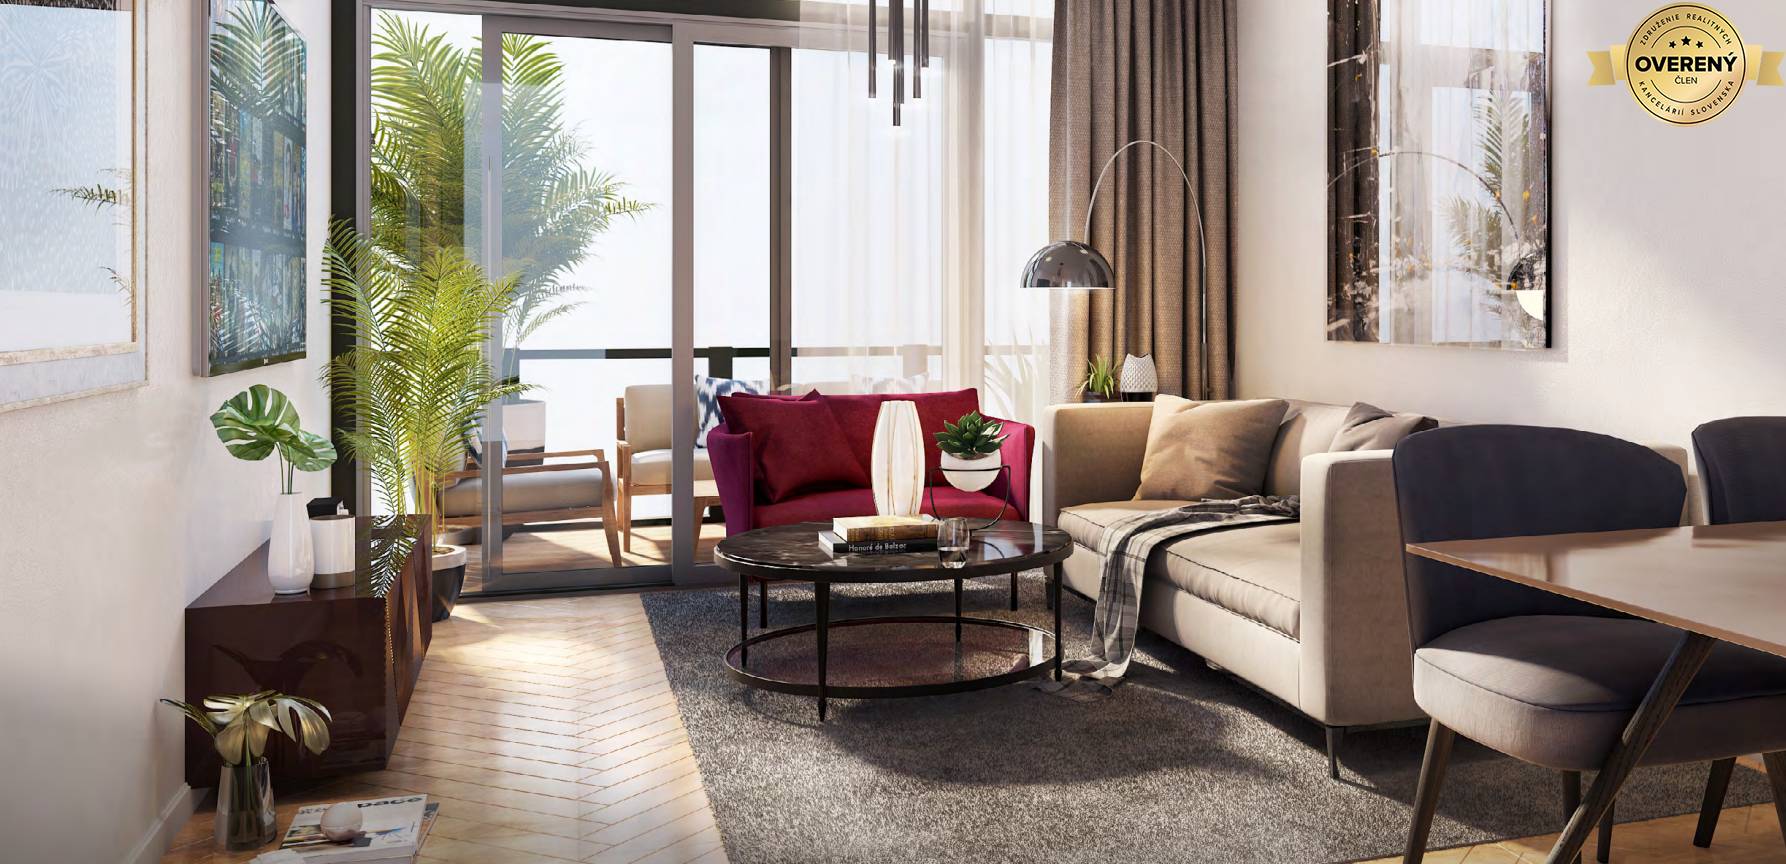 ALEXIS TOWER 2: Exceptional offer - studio apartment in the Dubai